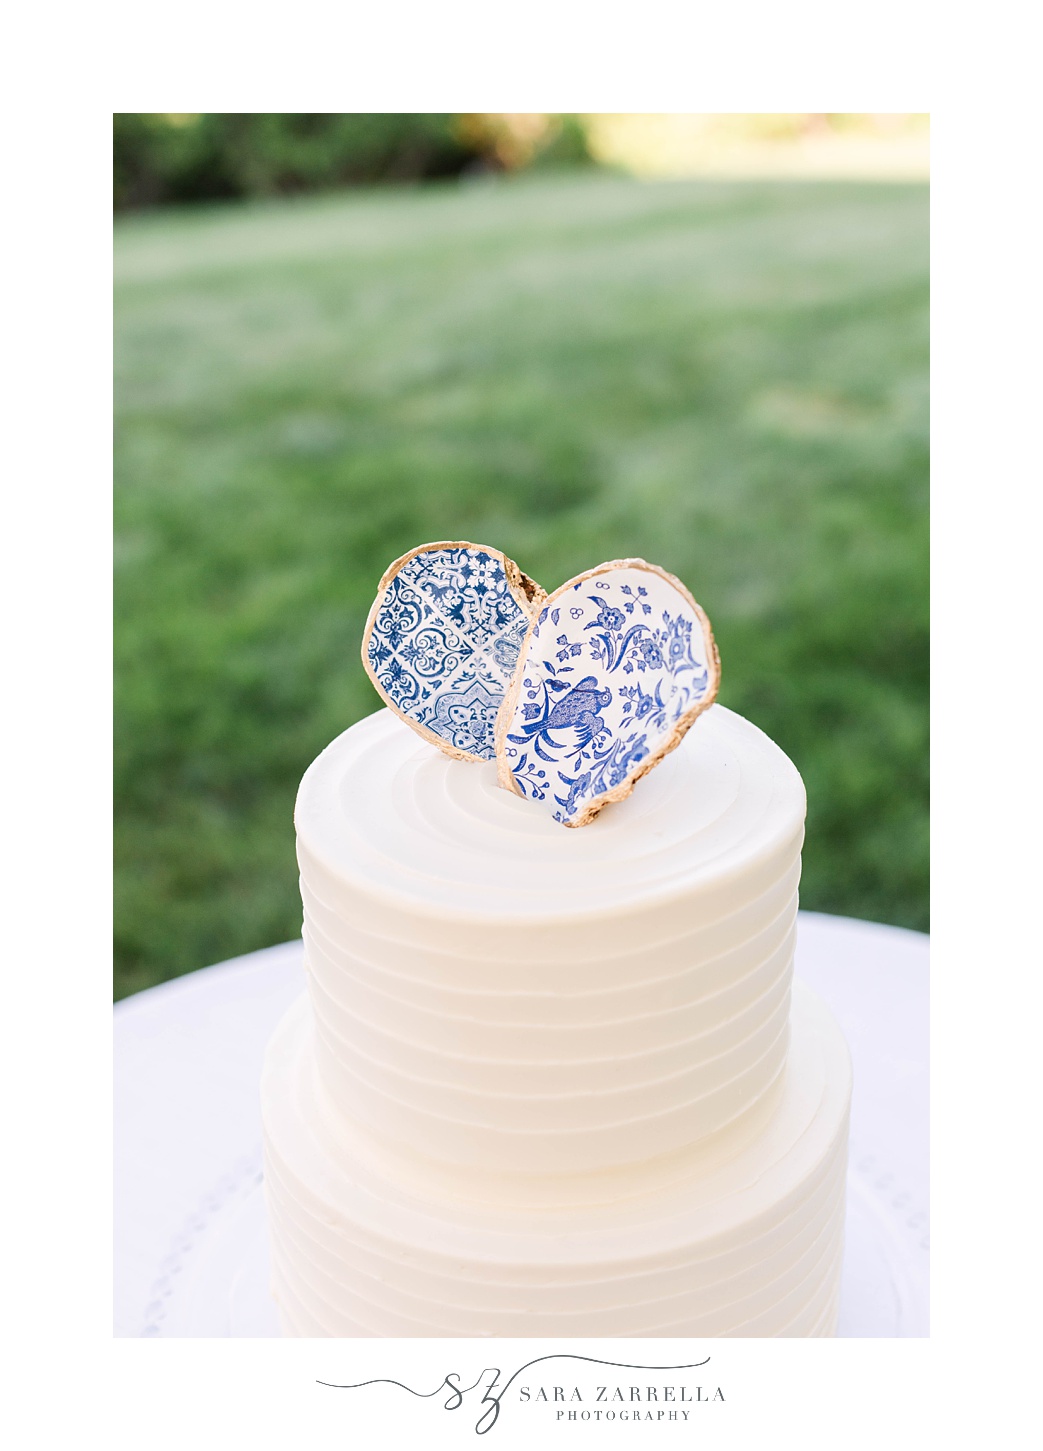 wedding cake with blue and white oyster on top